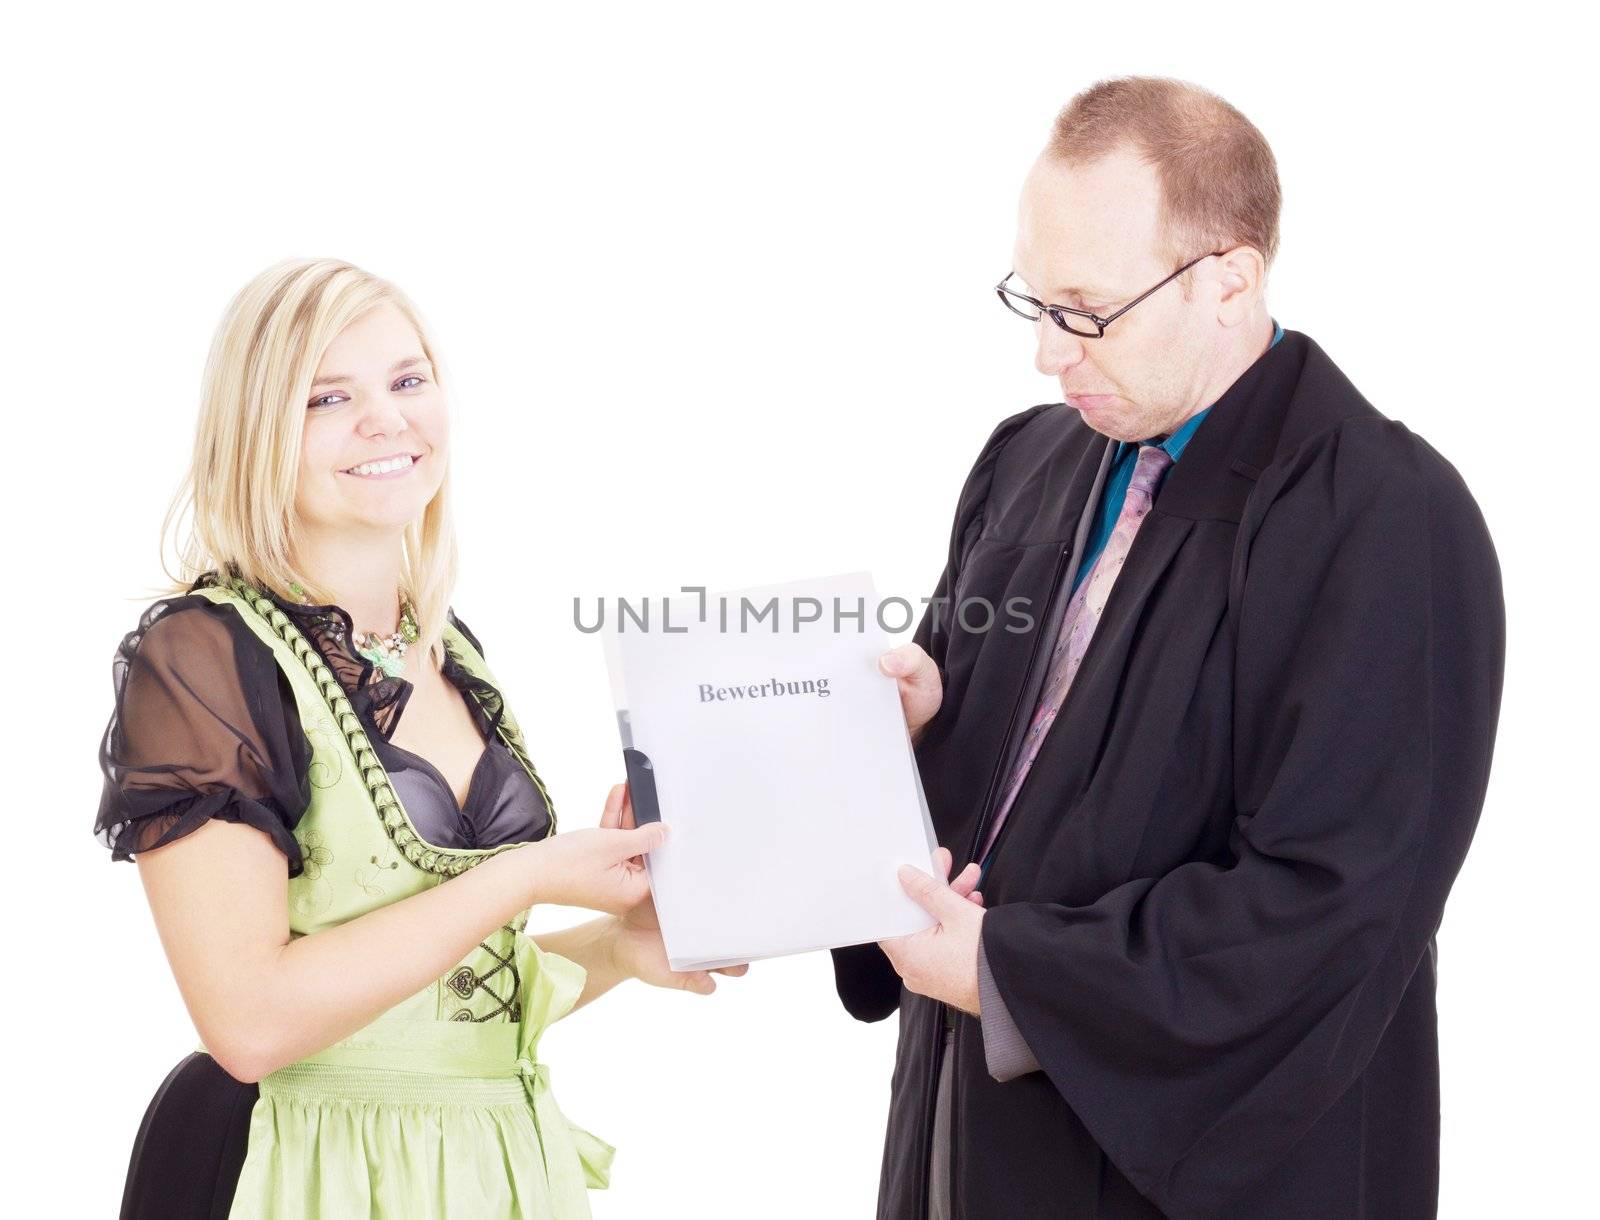 A staff executive interviews a young woman